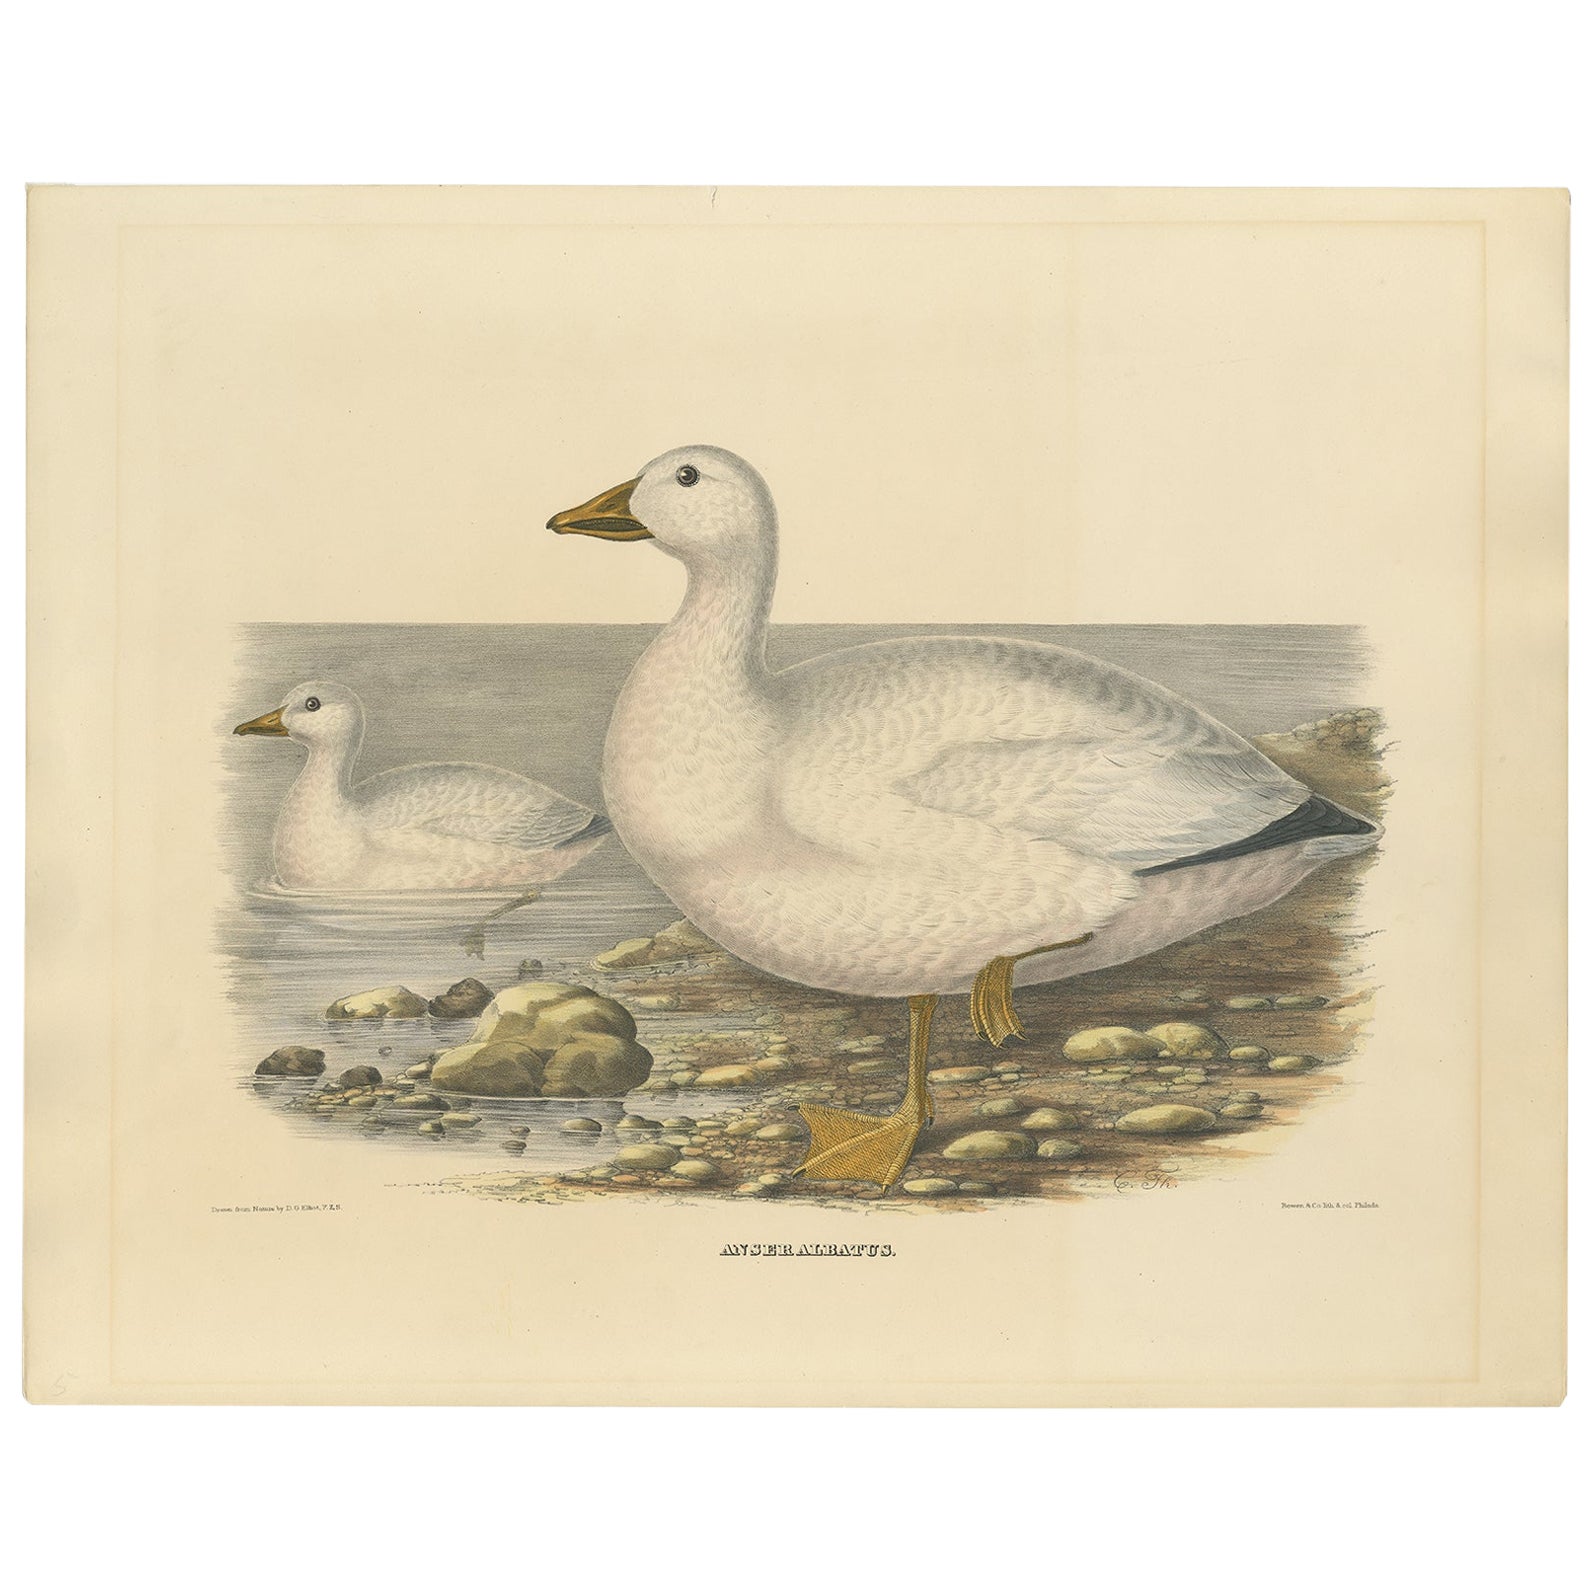 Antique bird print titled 'Anser Albatus'. Old bird print depicting Cassin's Snow Goose. This print originates from 'The new and heretofore unfigured species of the birds of North America', published 1866-1869. 

This spectacular large folio